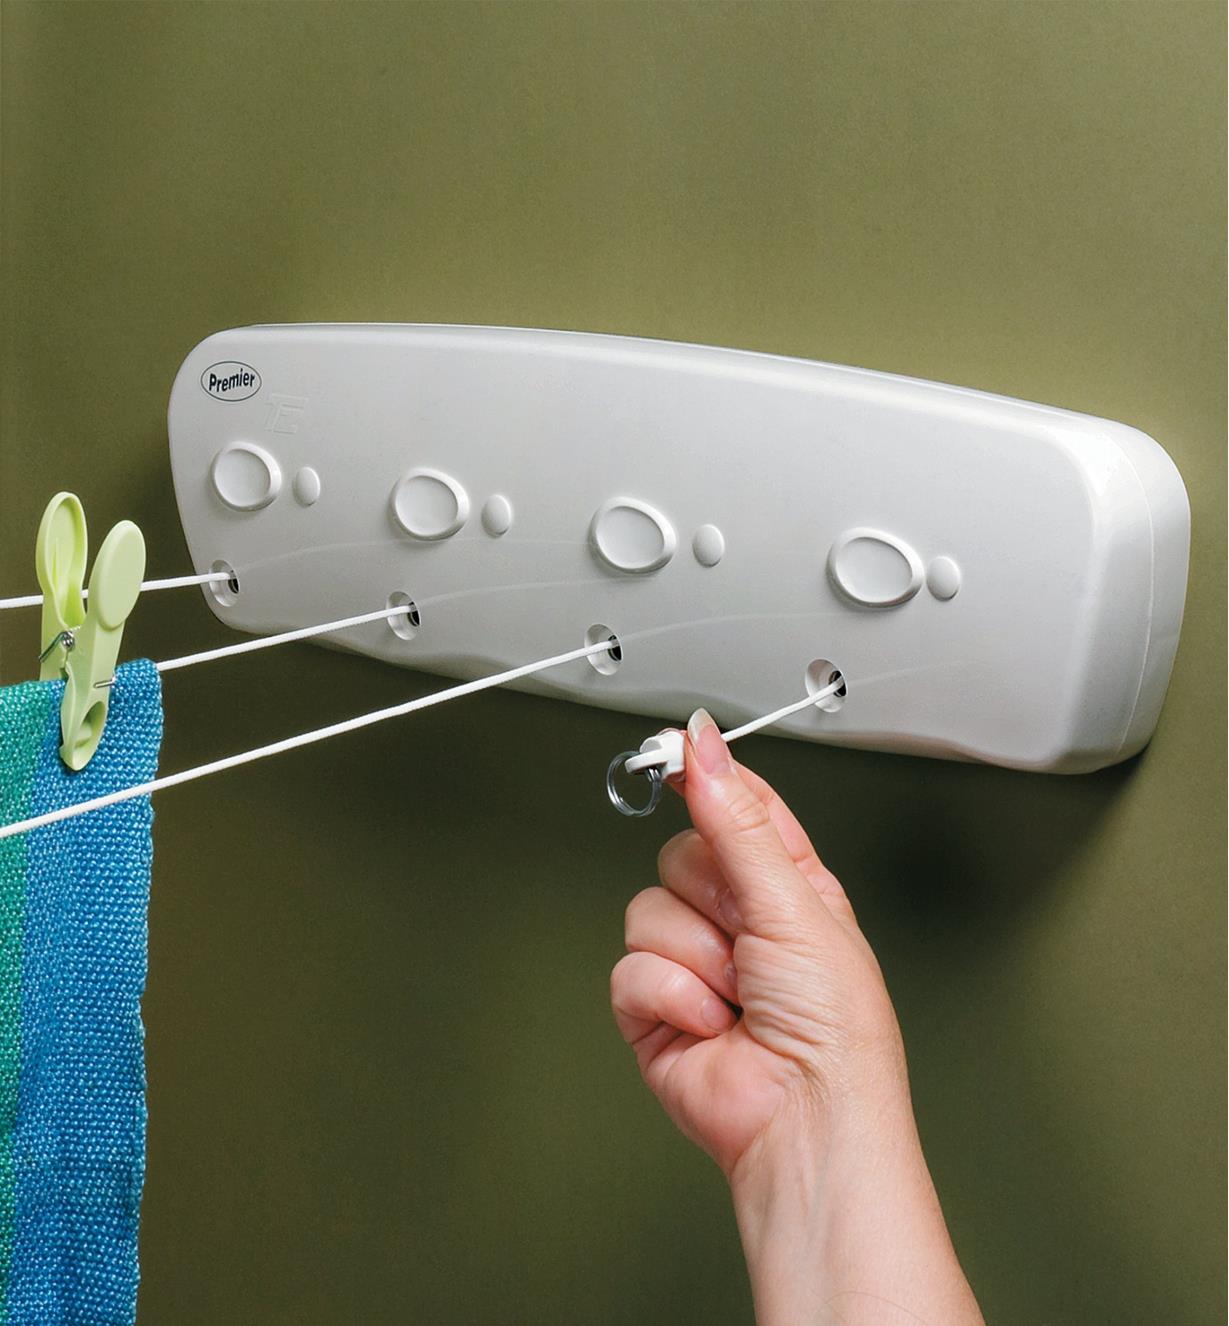 Withdrawing one of the lines on a four-line retractable clothesline that is mounted on a wall